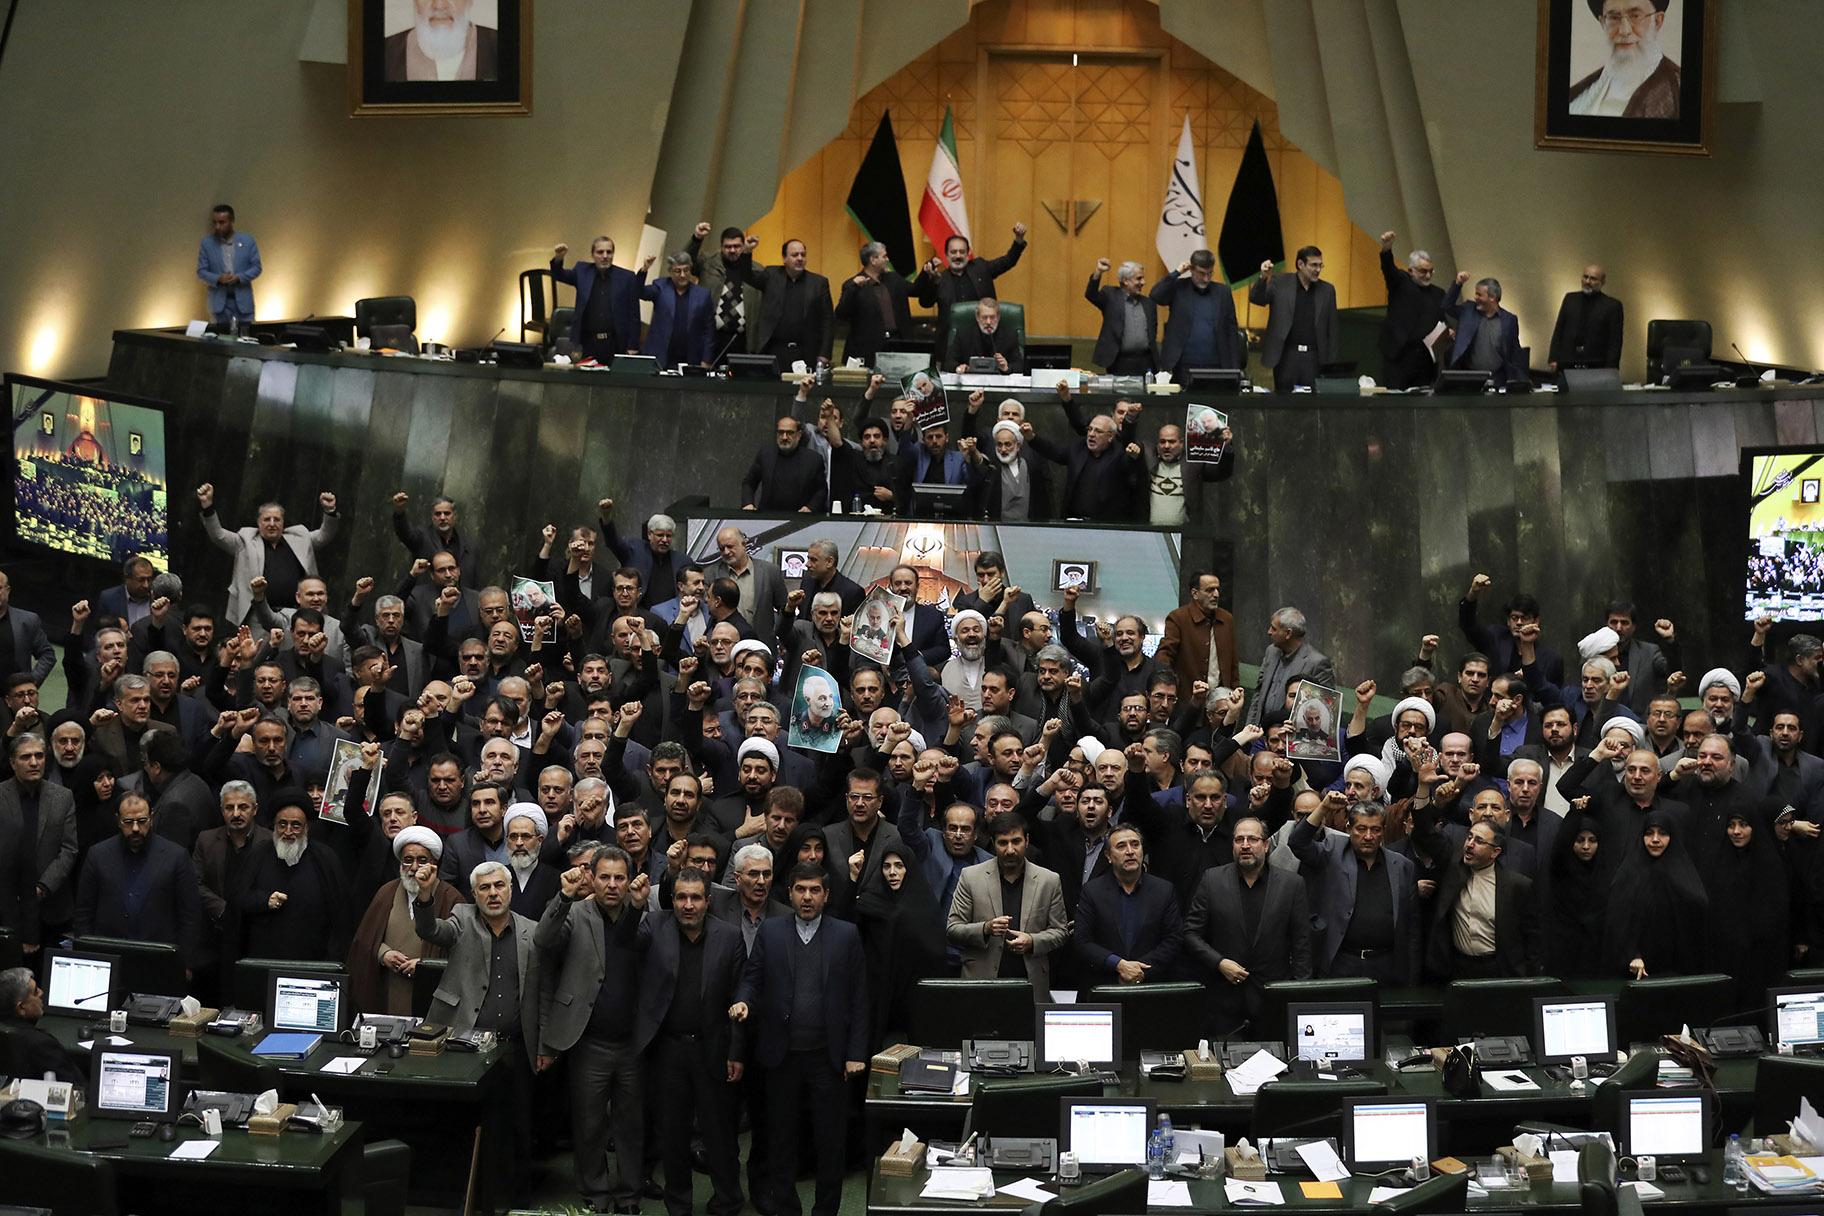 Iranian lawmakers chant slogans as some of them hold posters of Gen. Qassem Soleimani, who was killed in Iraq in a U.S. drone attack, in an open session of parliament, in Tehran, Iran, Tuesday, Jan. 7, 2020. (AP Photo / Vahid Salemi)